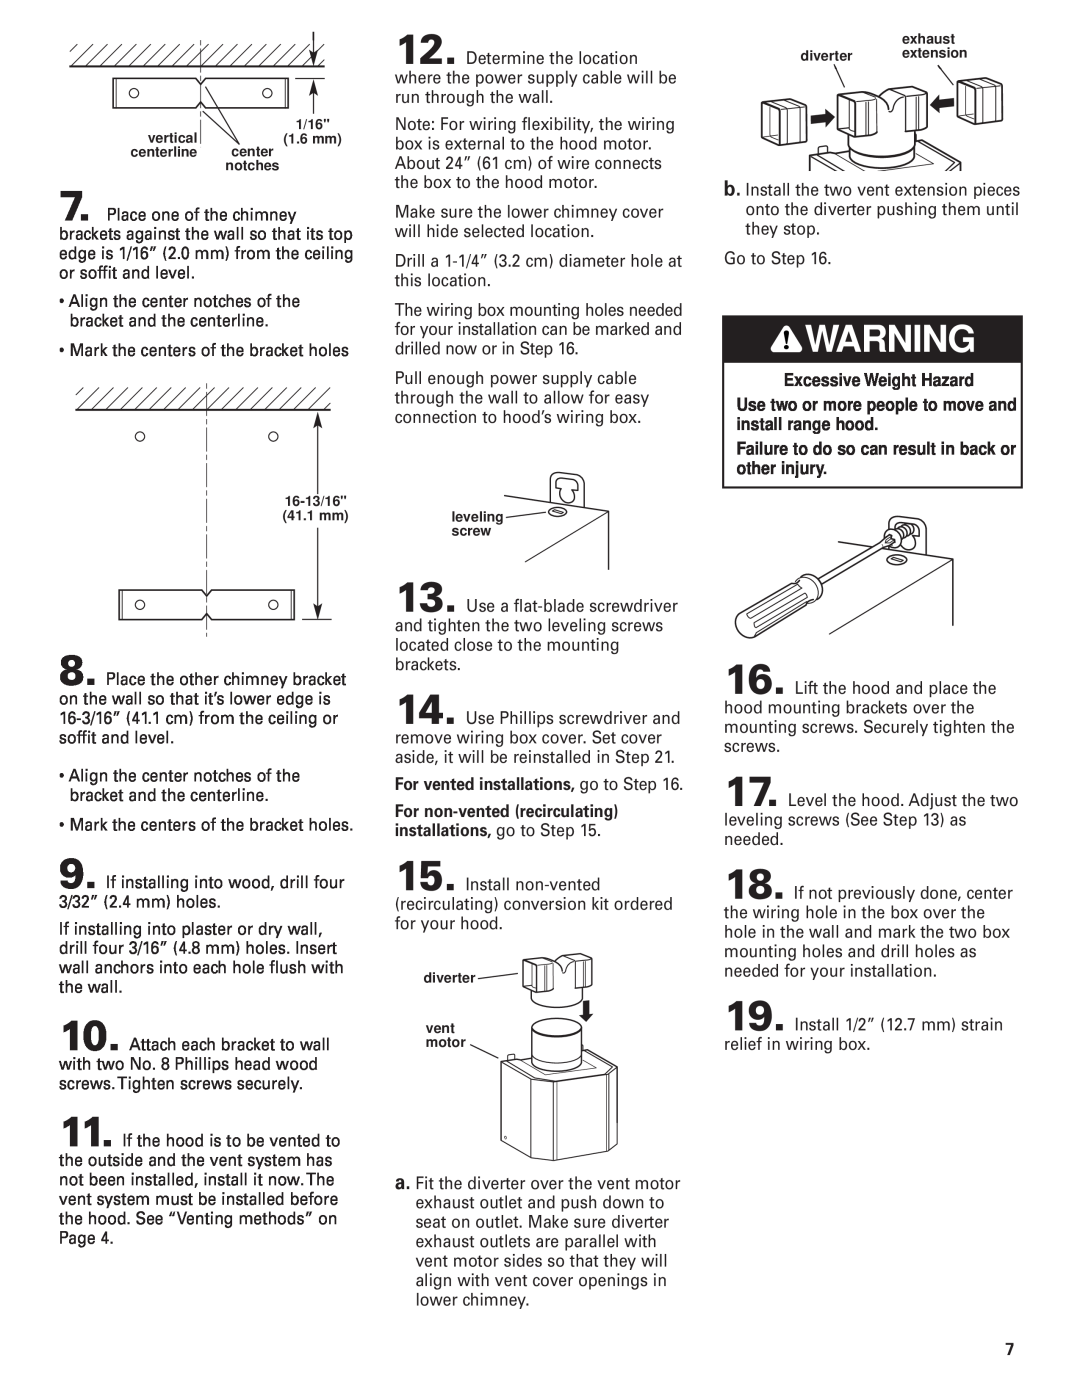 KitchenAid Pro Line Series installation instructions For vented installations, go to Step, Excessive Weight Hazard 